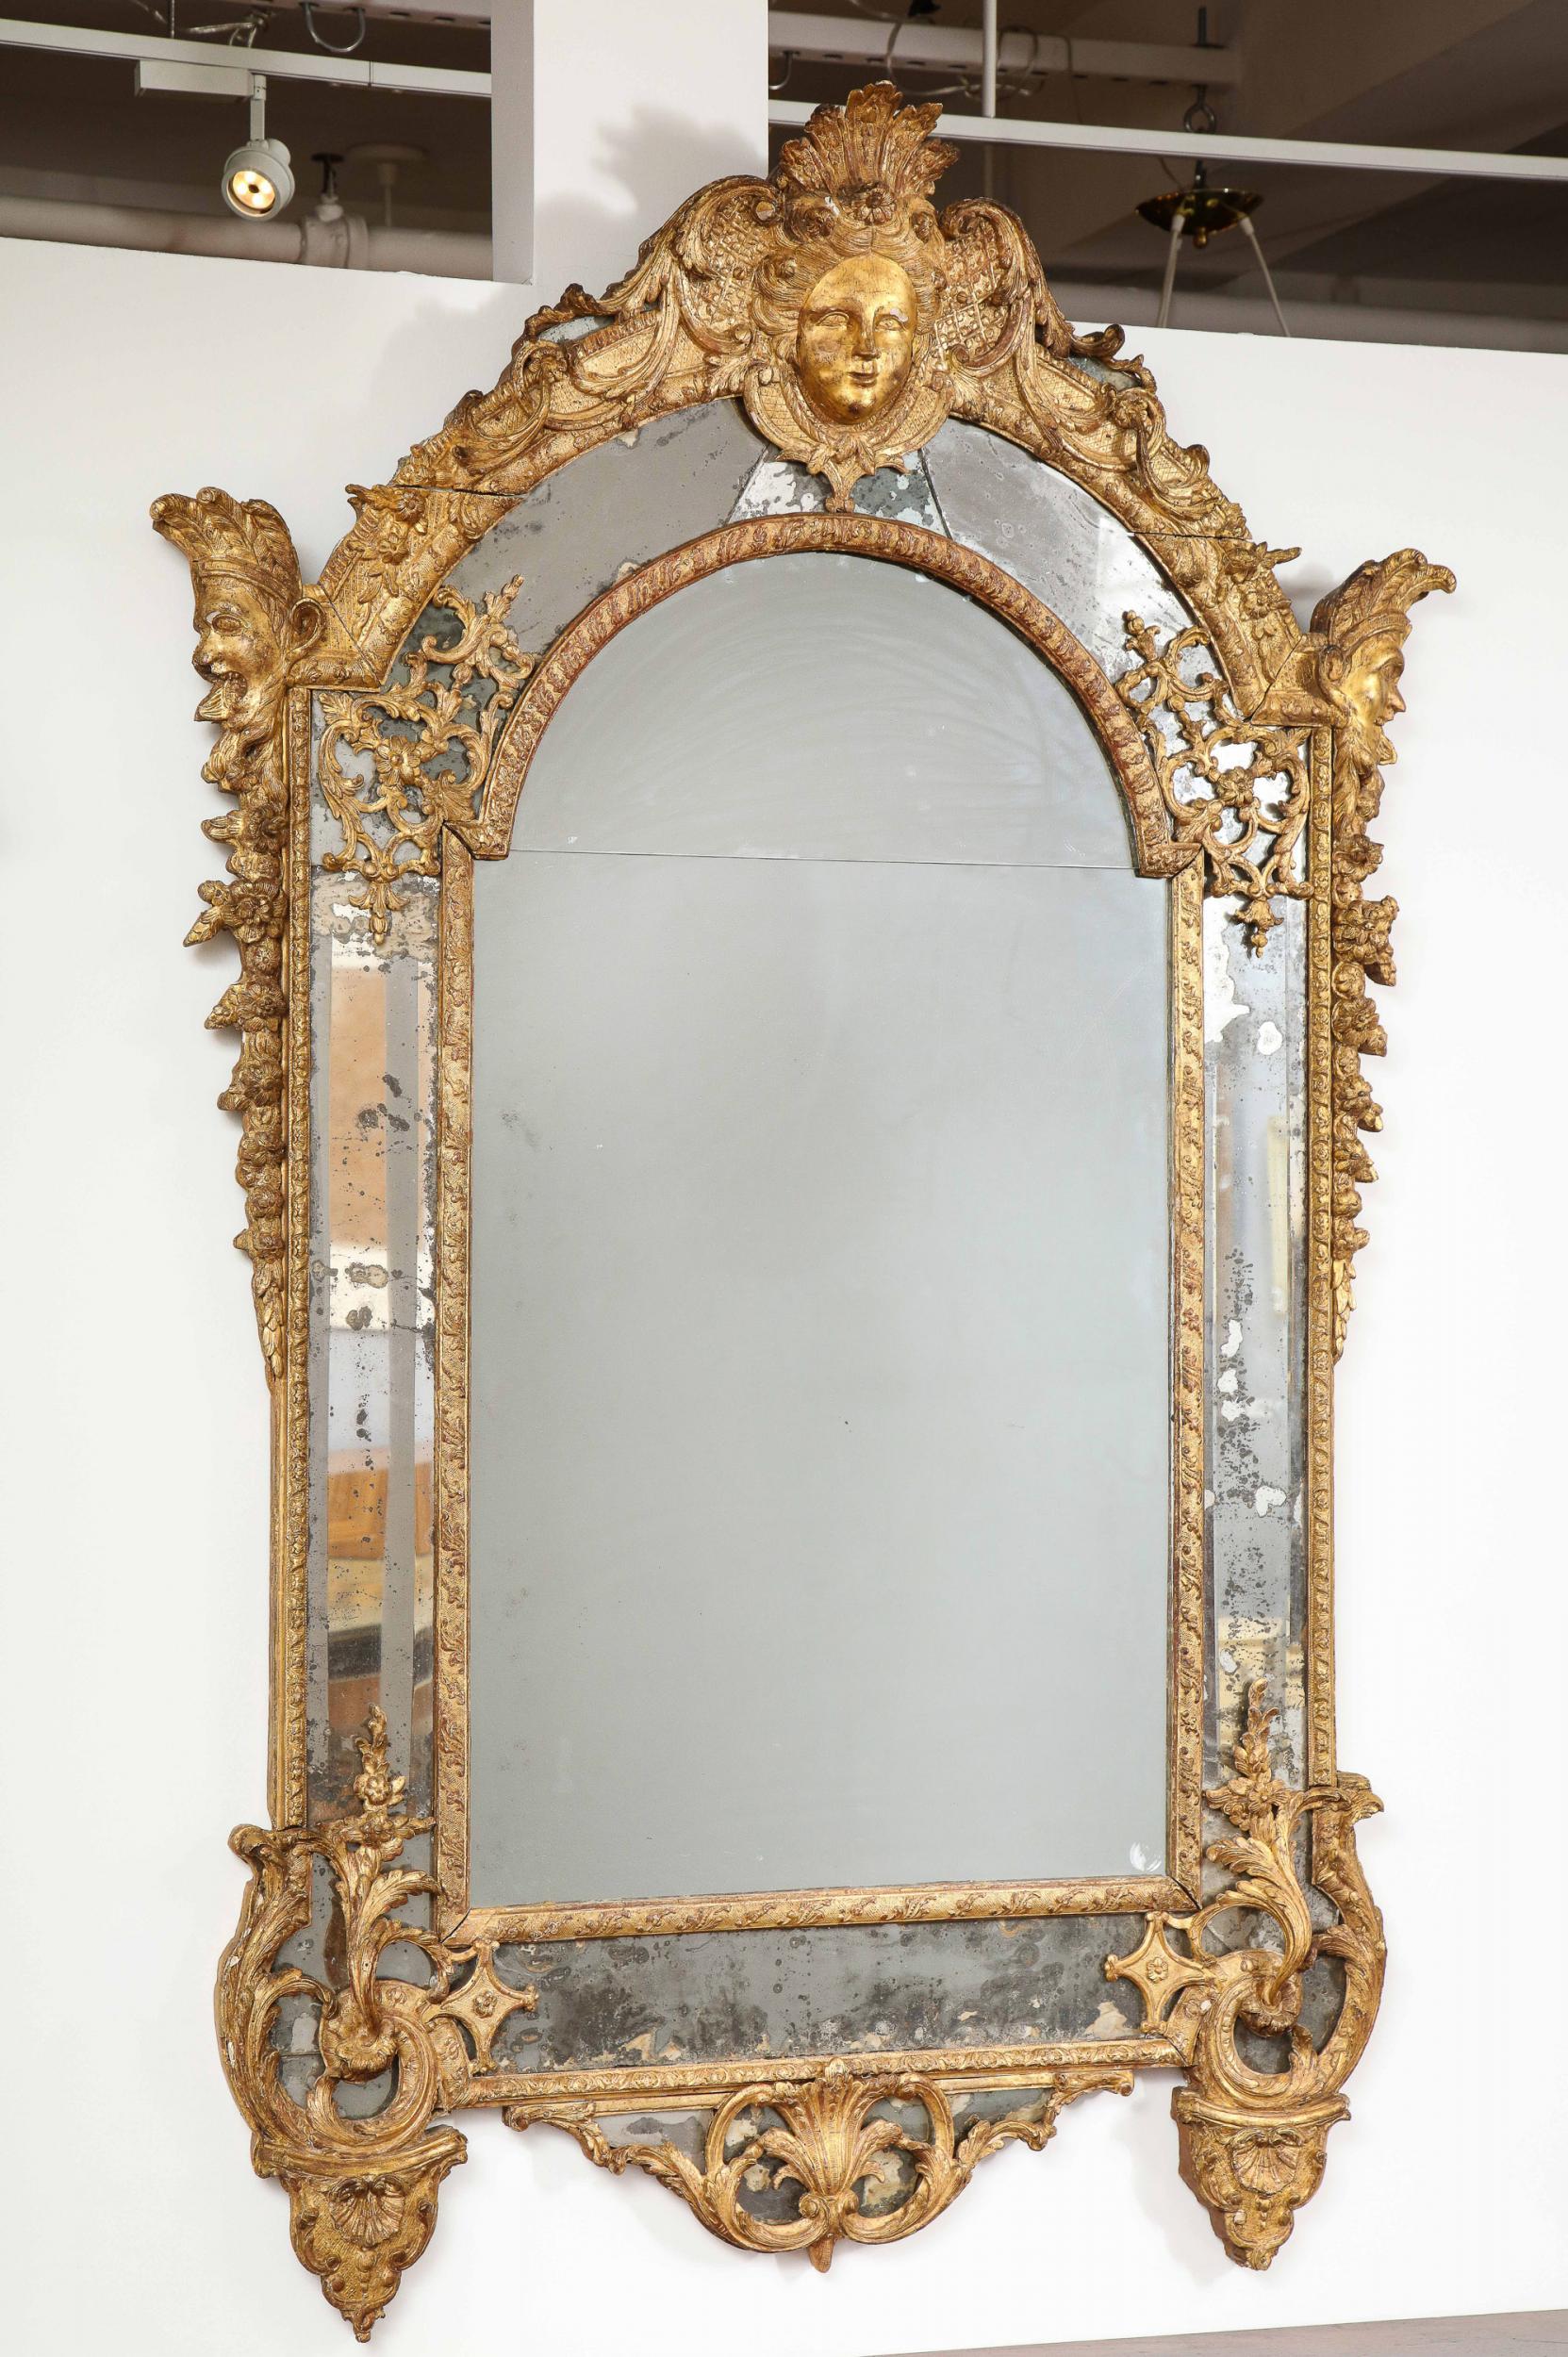 Large and fine French Régence period giltwood mirror, the lobed crest with maiden's head mask flanked by foliate and scroll carving, the sides with satyr heads wearing feather headdresses, having foliate carved festoons, the central plates with